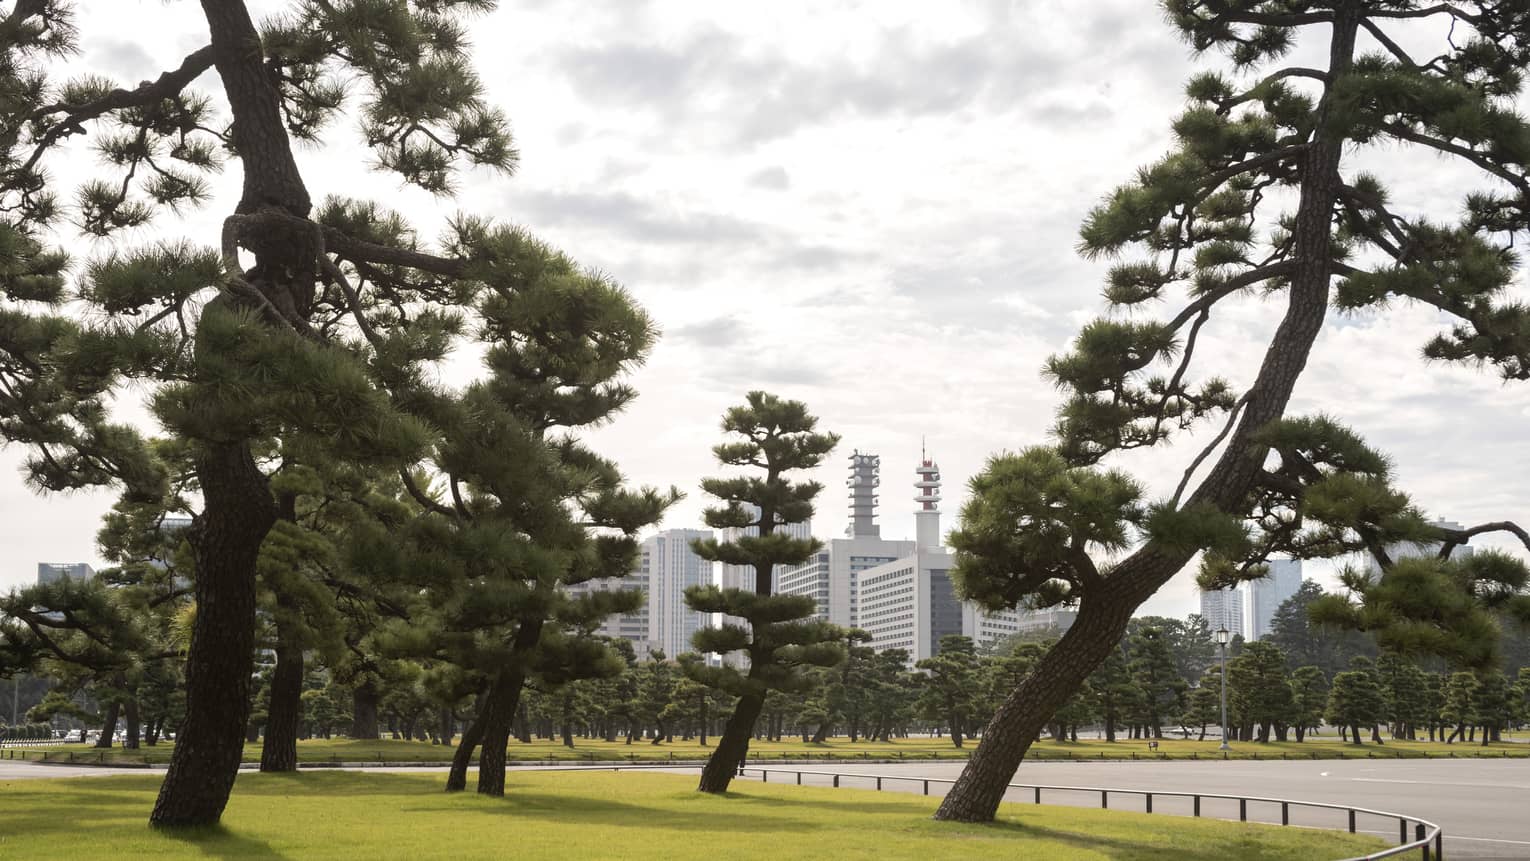 Mature trees line an empty street, downtown Tokyo skyline visible in the background